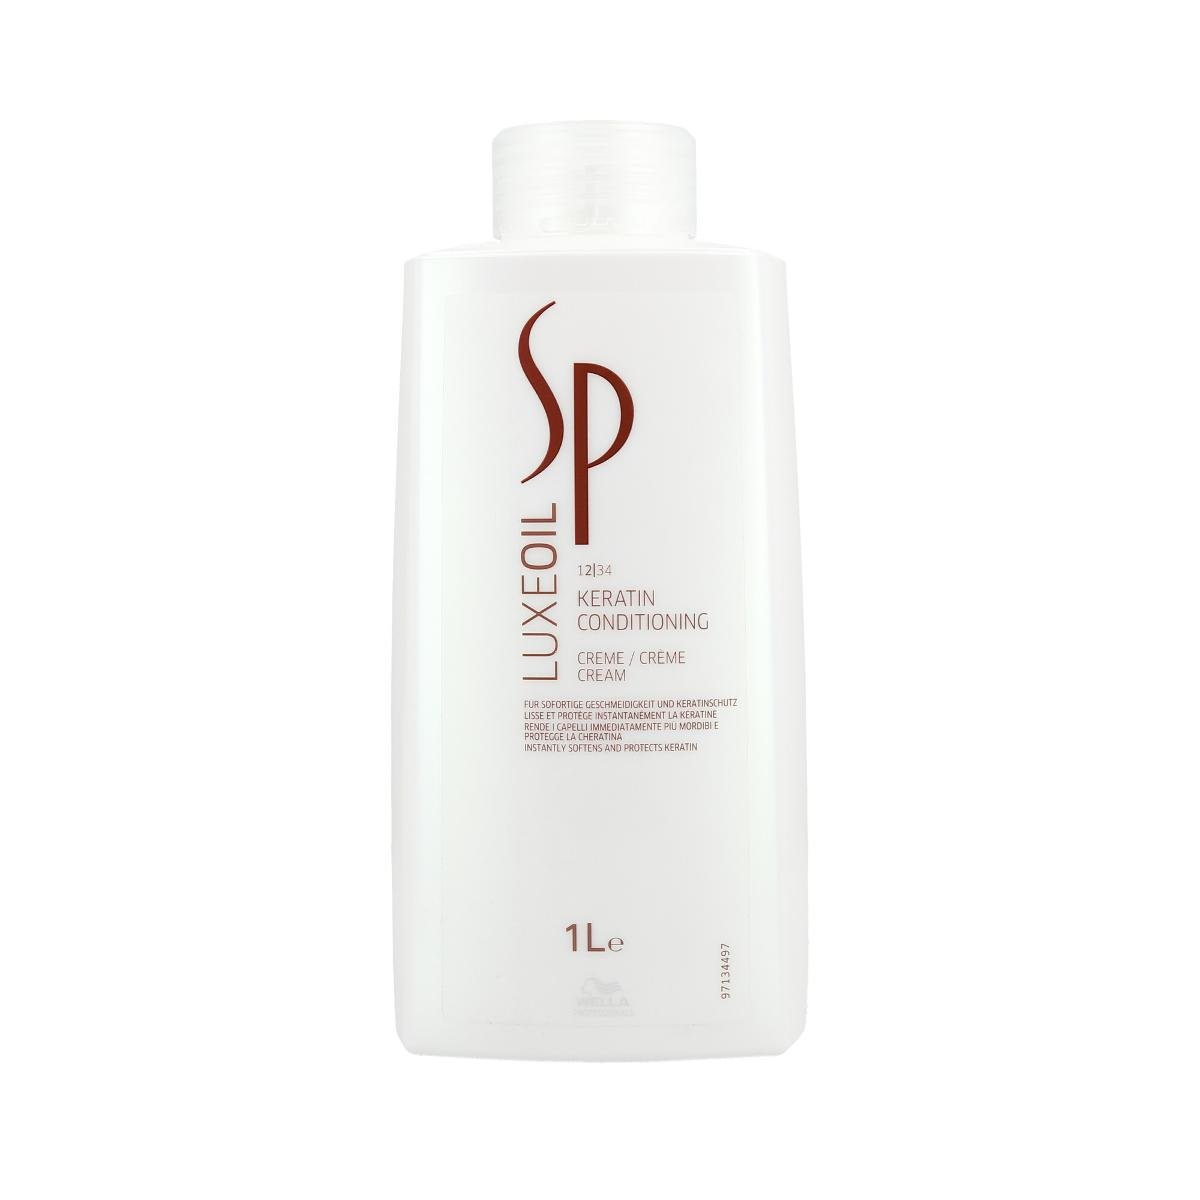 Wella SP system Professional LuxeOil Keratin Conditioning kremowy, 1er Pack (1 X 1 L) 4084500606098